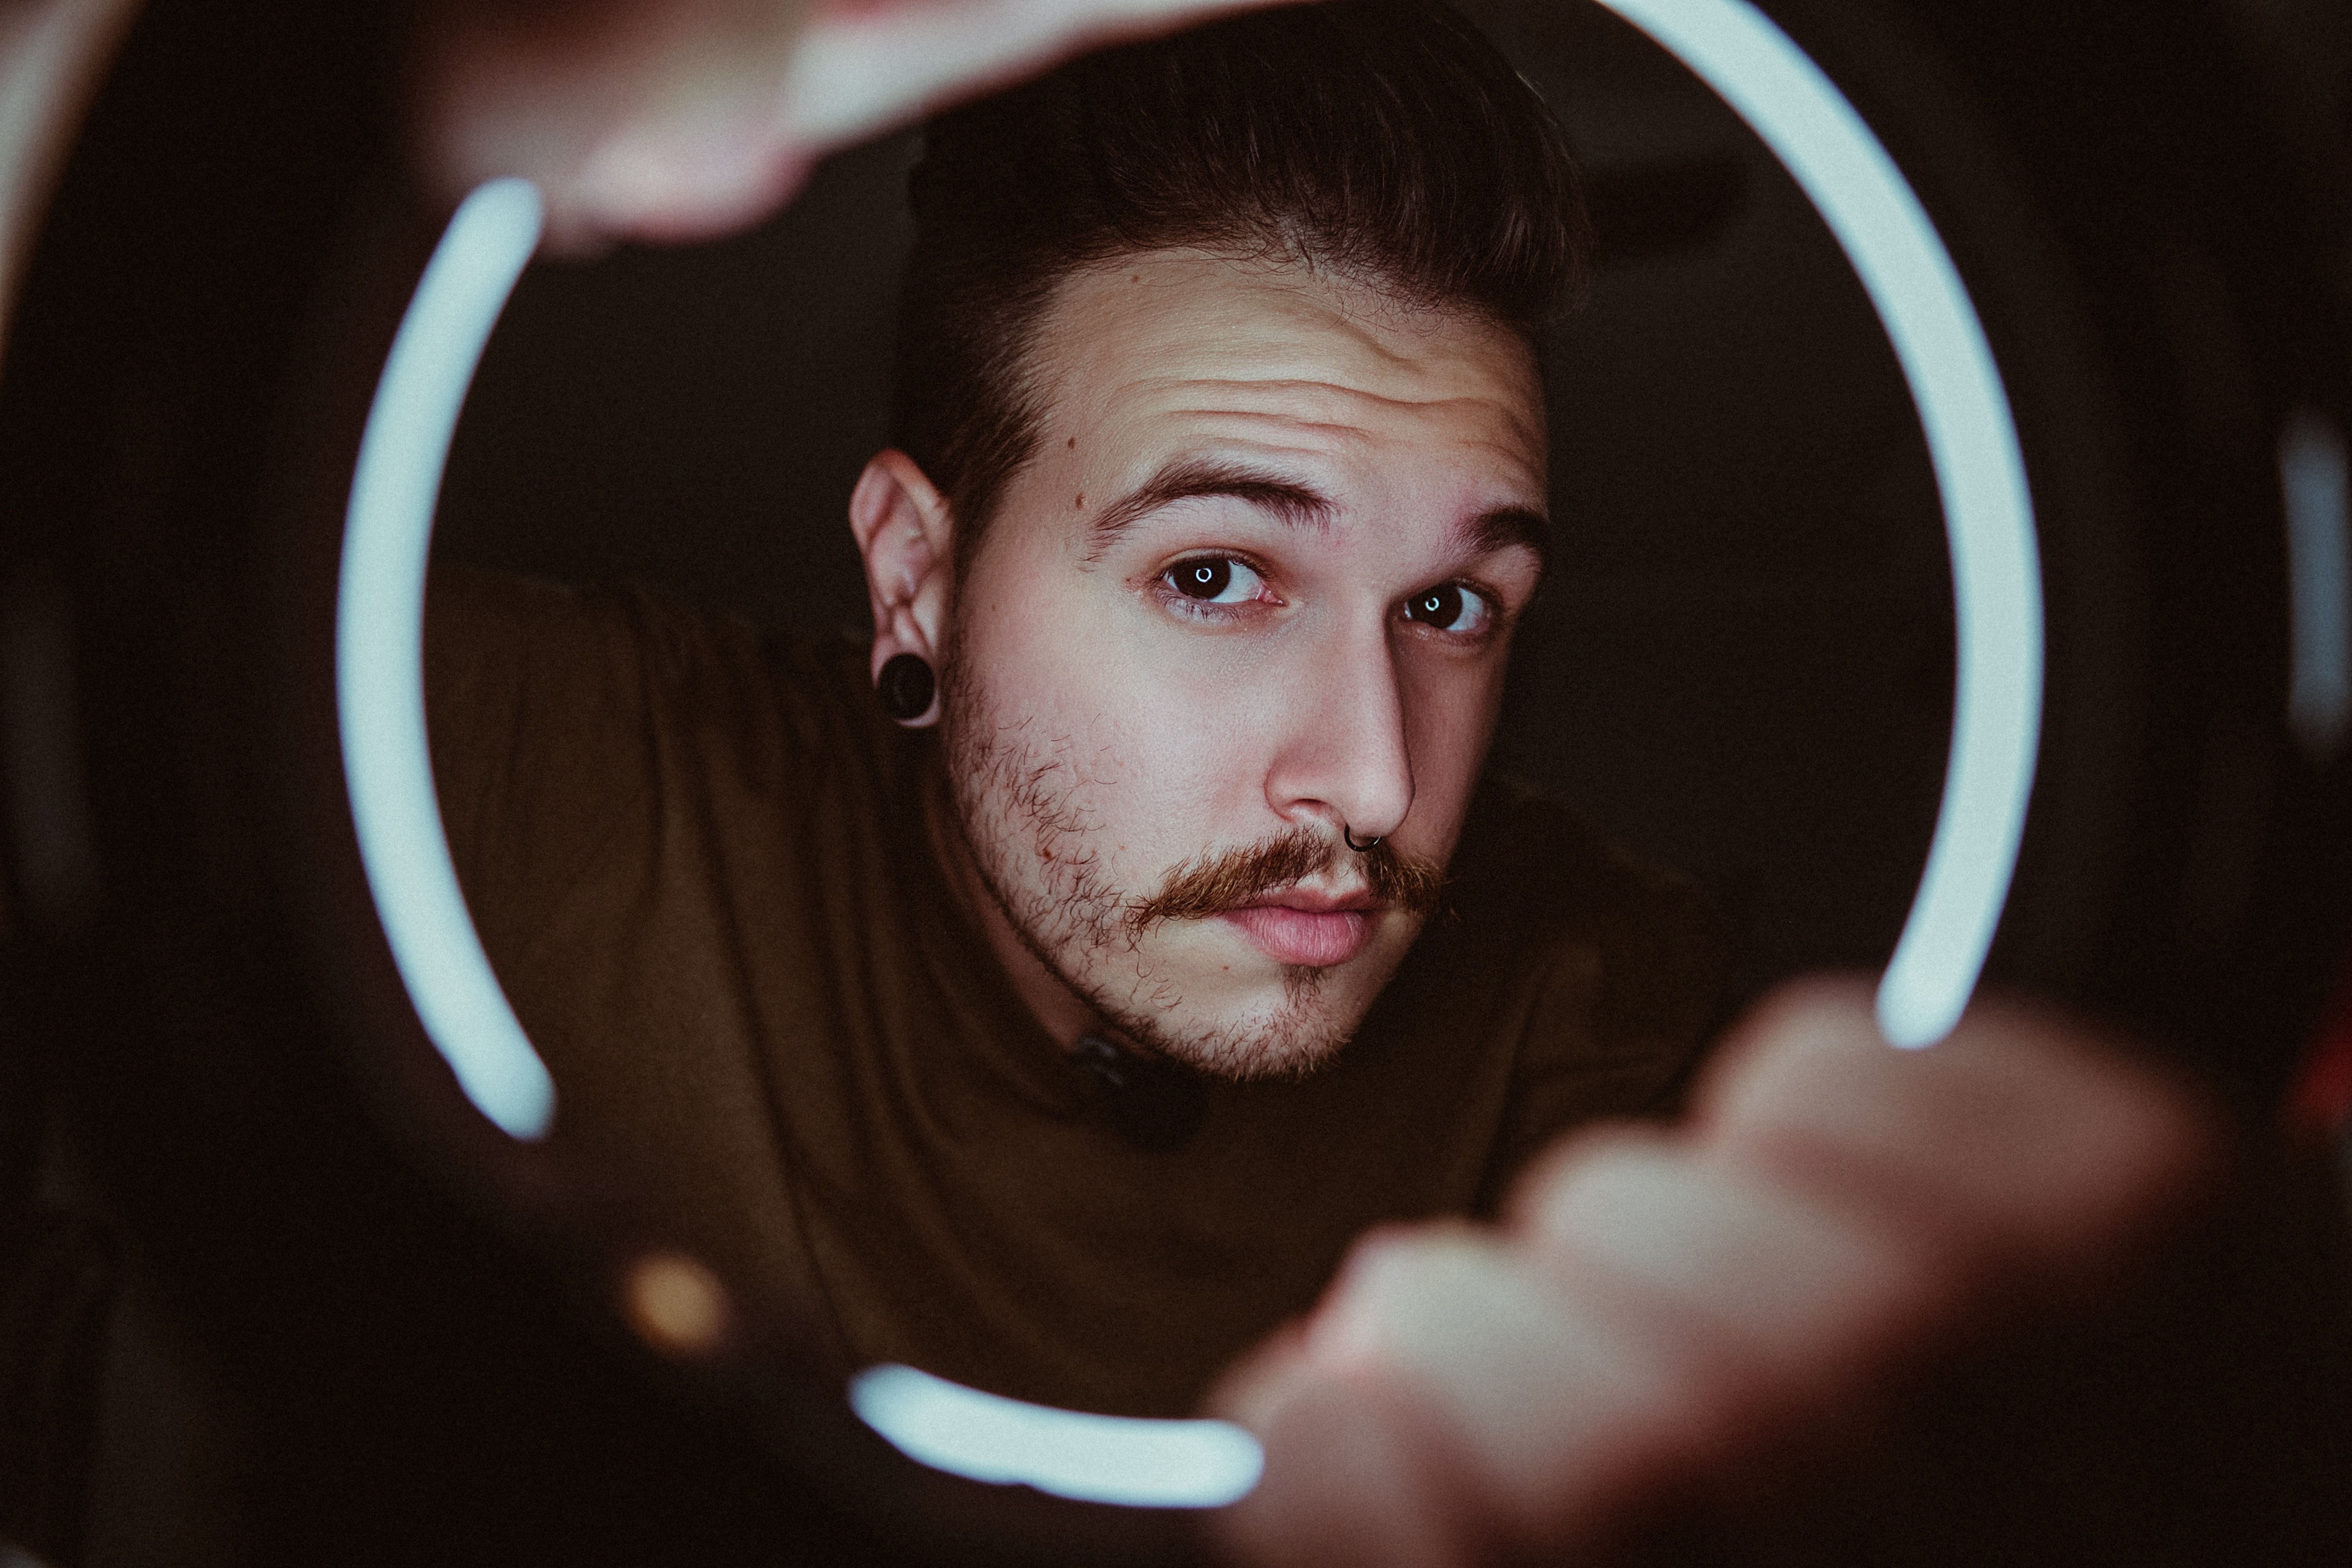 Photo of a person holding a ring light